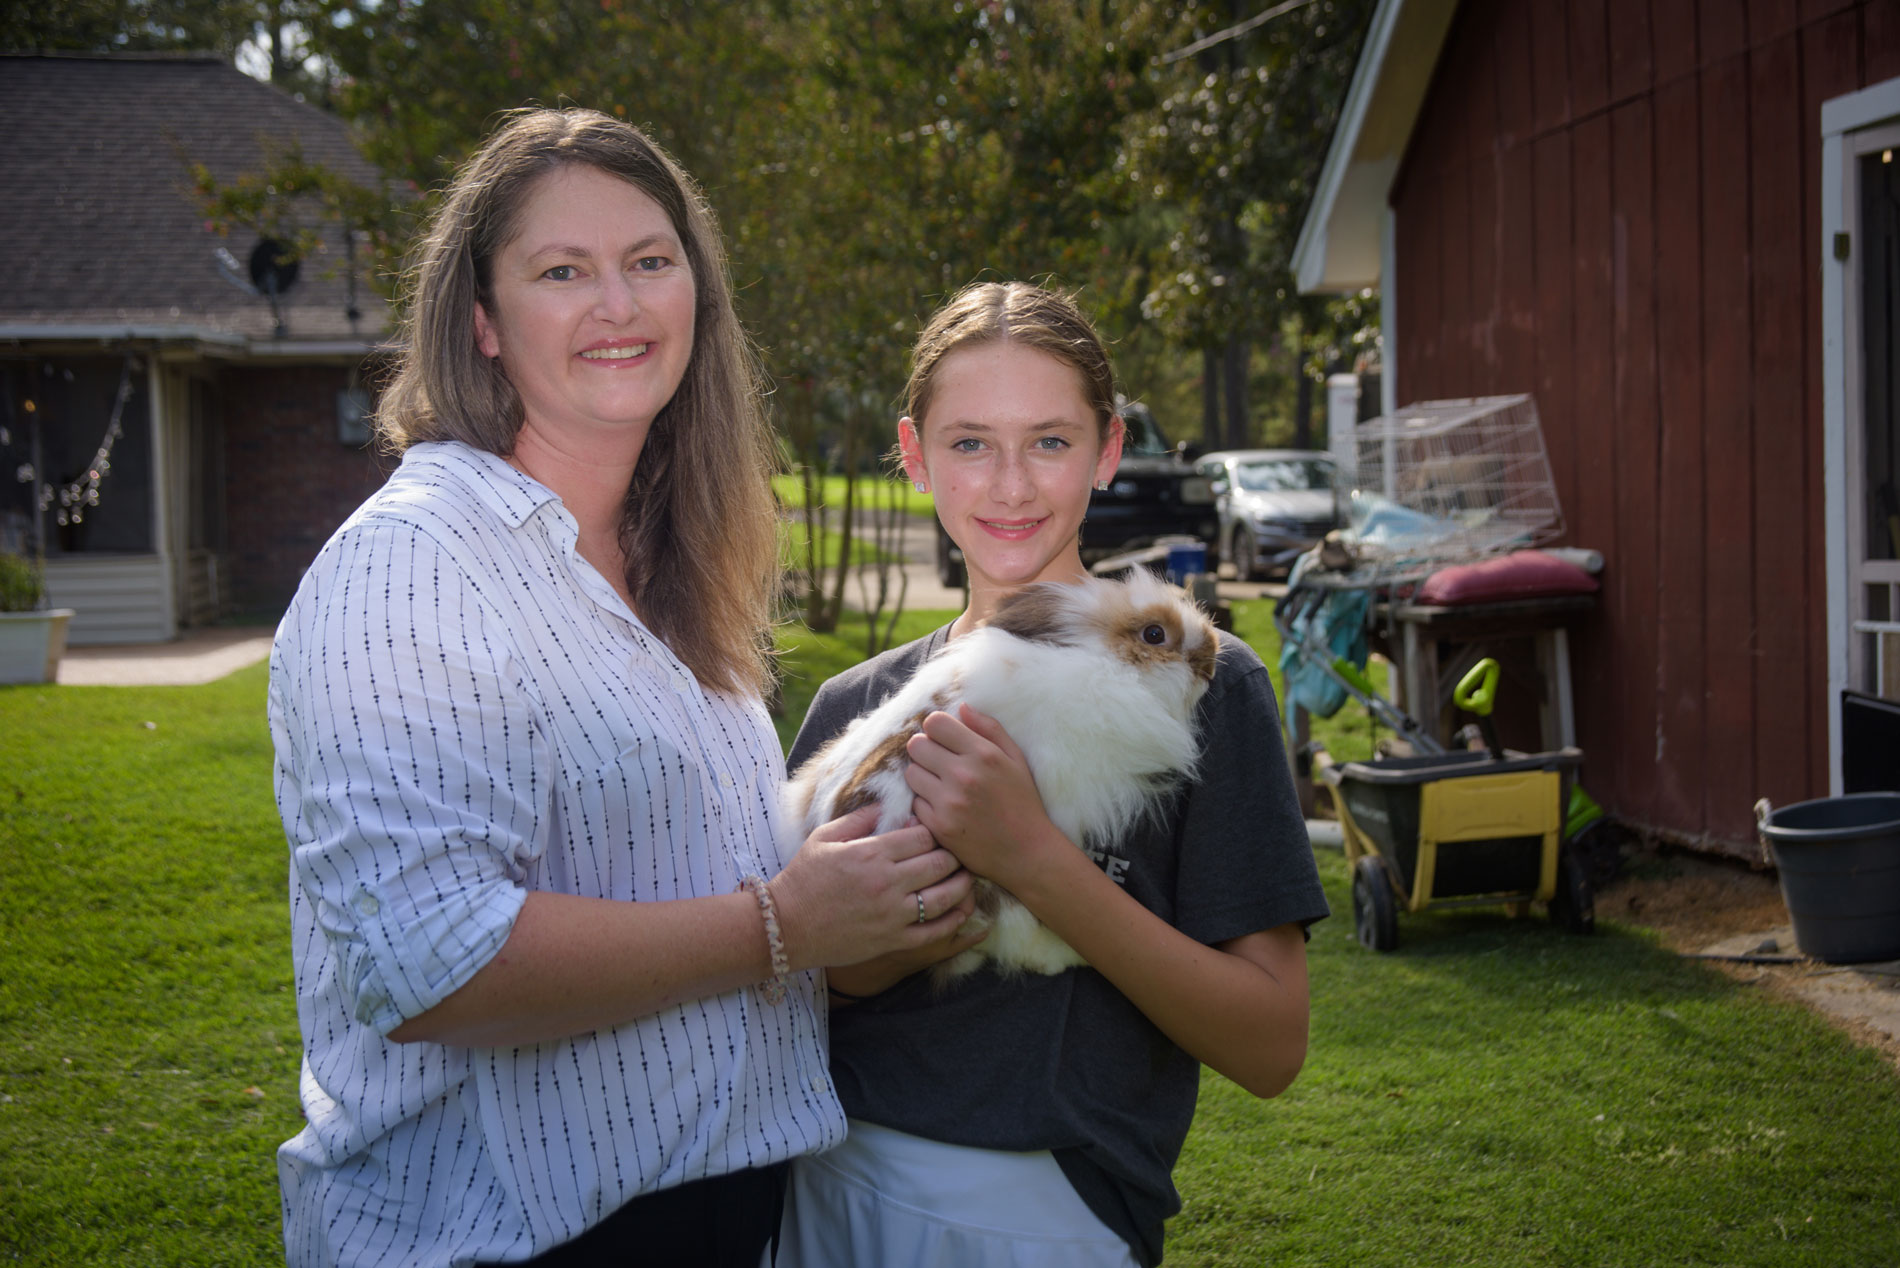 A girl holding a rabbit with a woman on her left who’s also touching the rabbit.